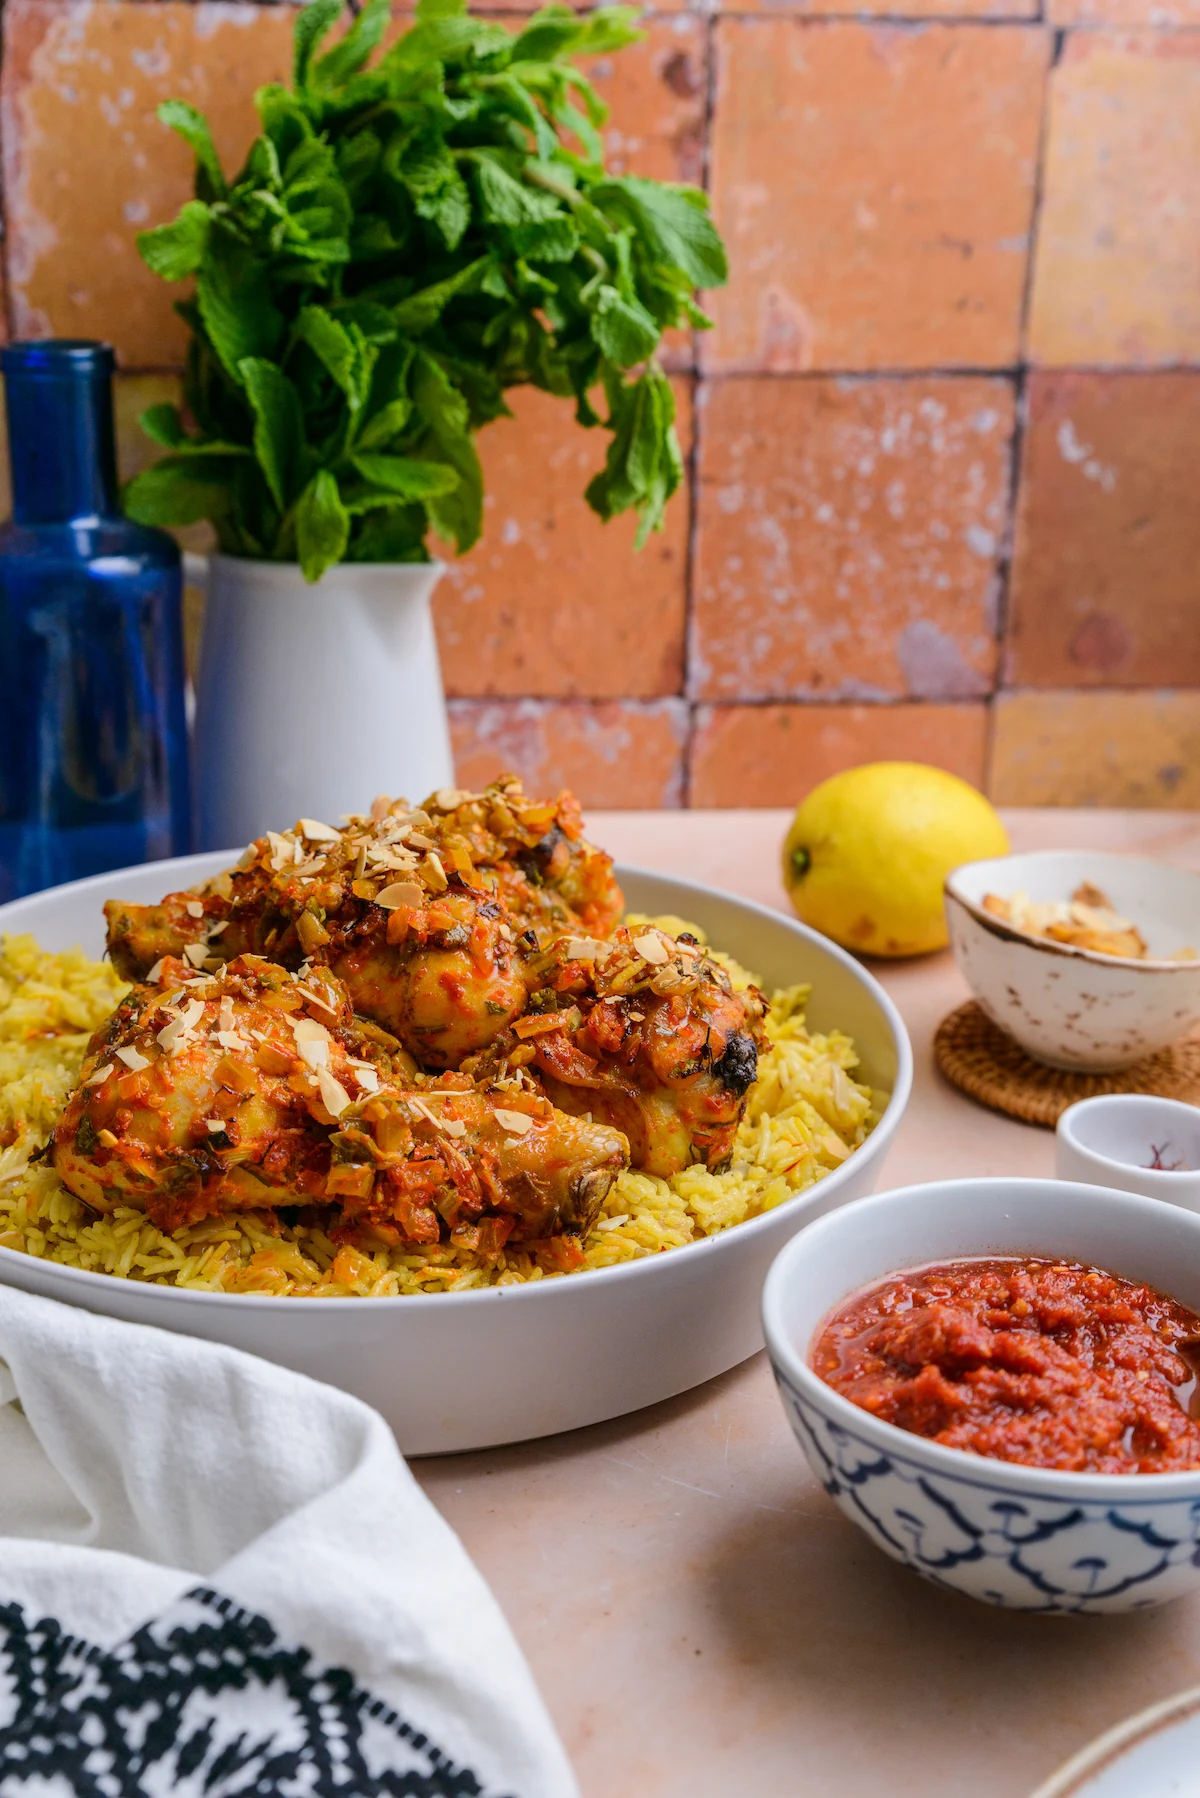 Several bowls sit on a table, the large bowl in the background has saffron rice and is topped with pieces of chicken coated in harissa sauce.